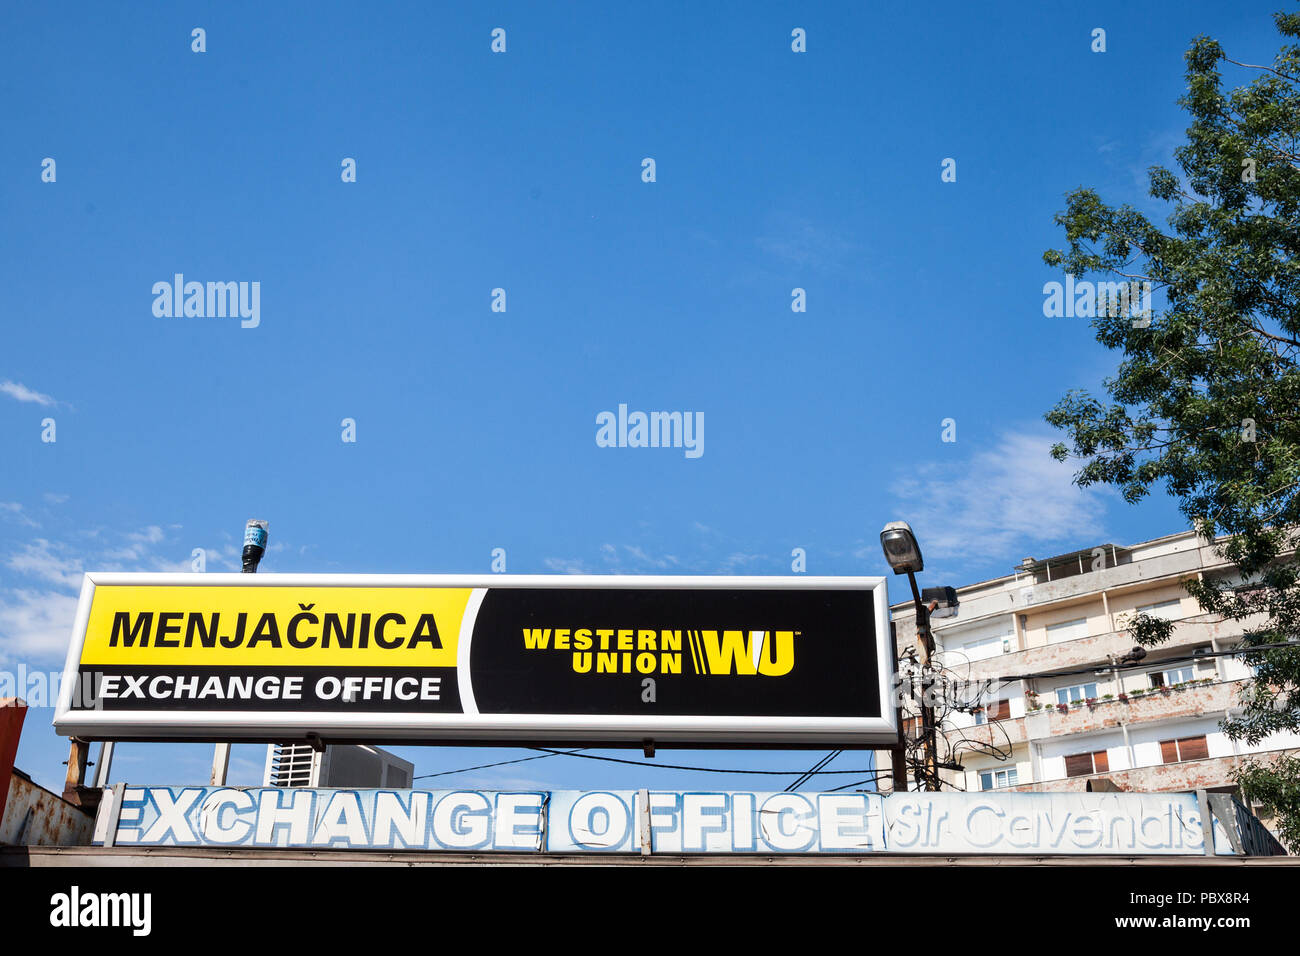 BELGRADE, SERBIA - JULY 11, 2018: Western Union logo on their main exchange office for Belgrade. The Western Union Company is an American financial se Stock Photo